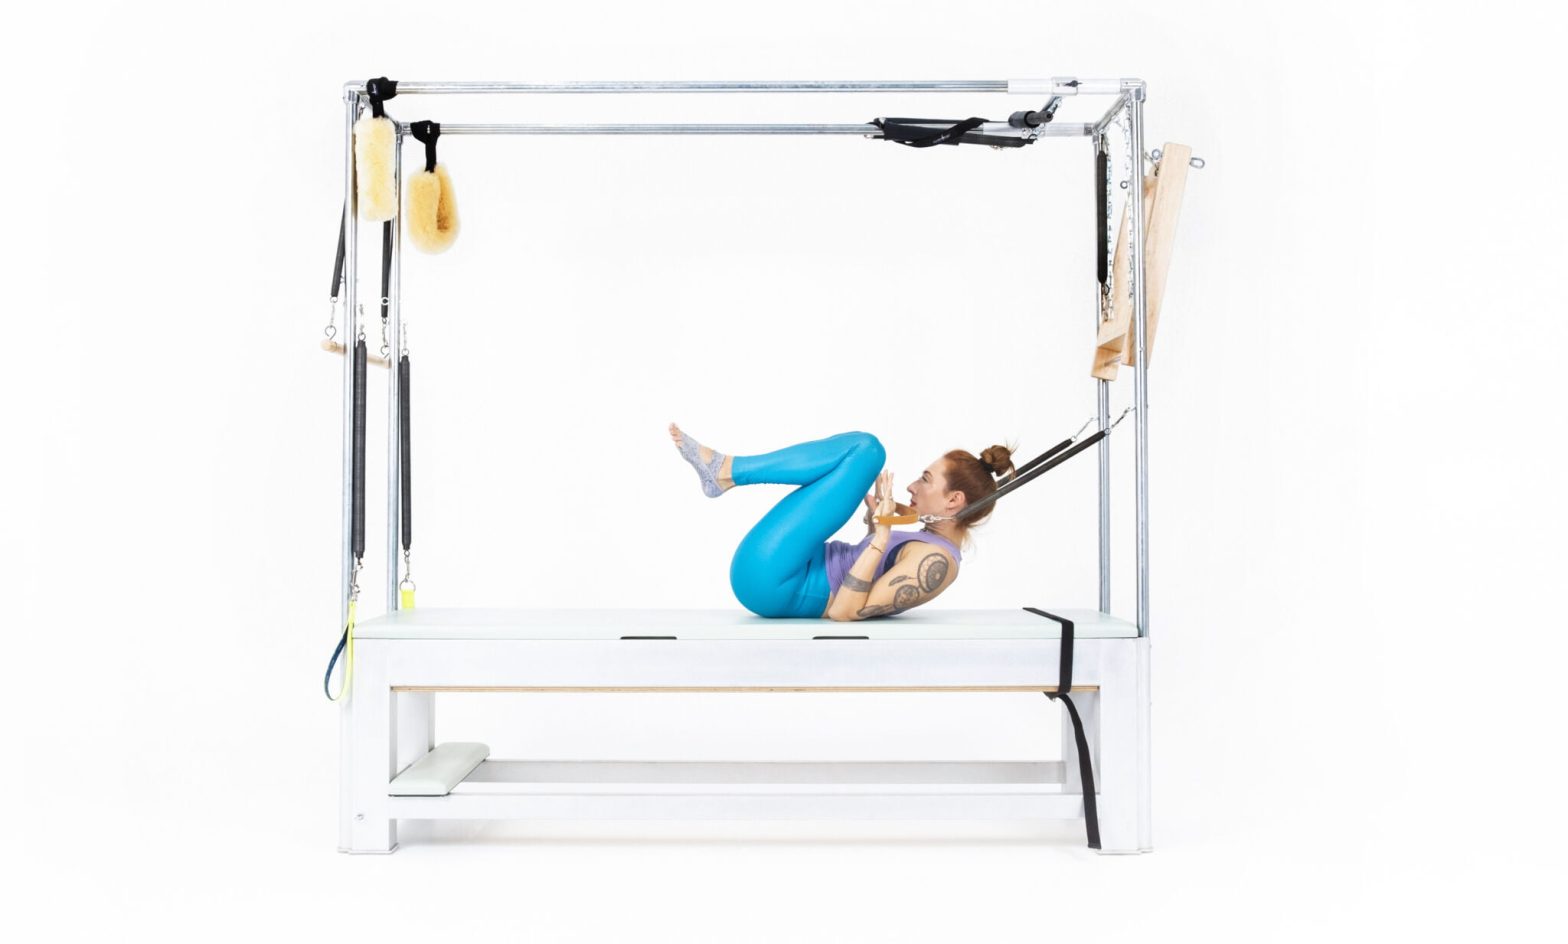 Coordination-on-the-Cadillac-Online-Pilates-Classes-scaled